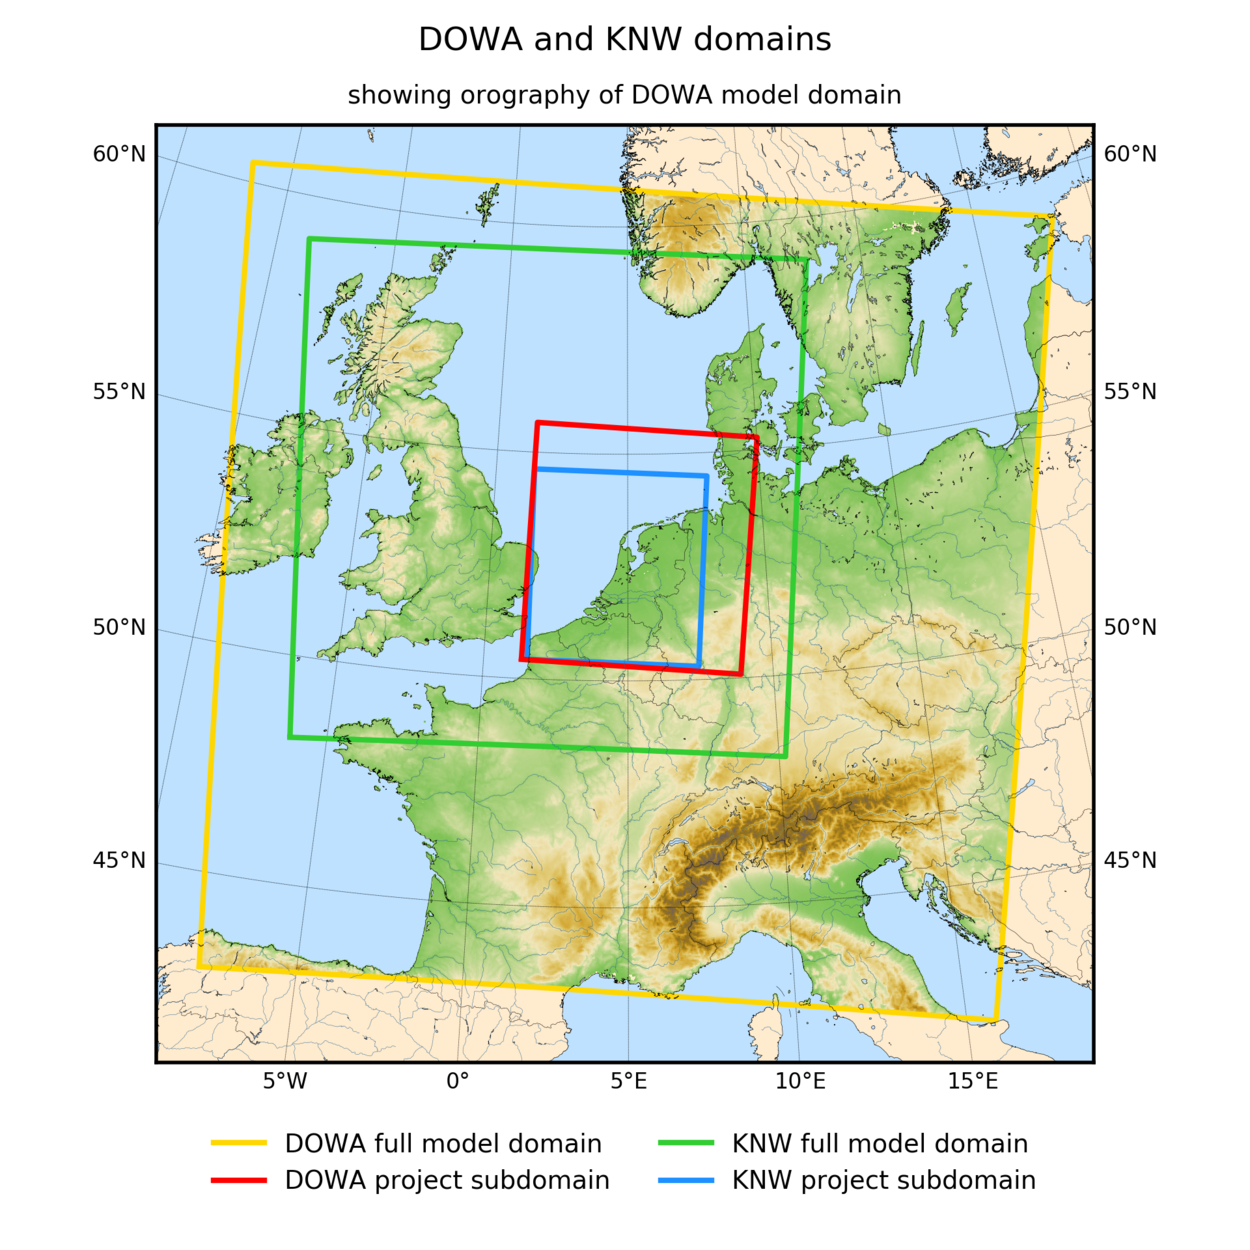 DOWA_and_KNW_domains_and_orography_wide